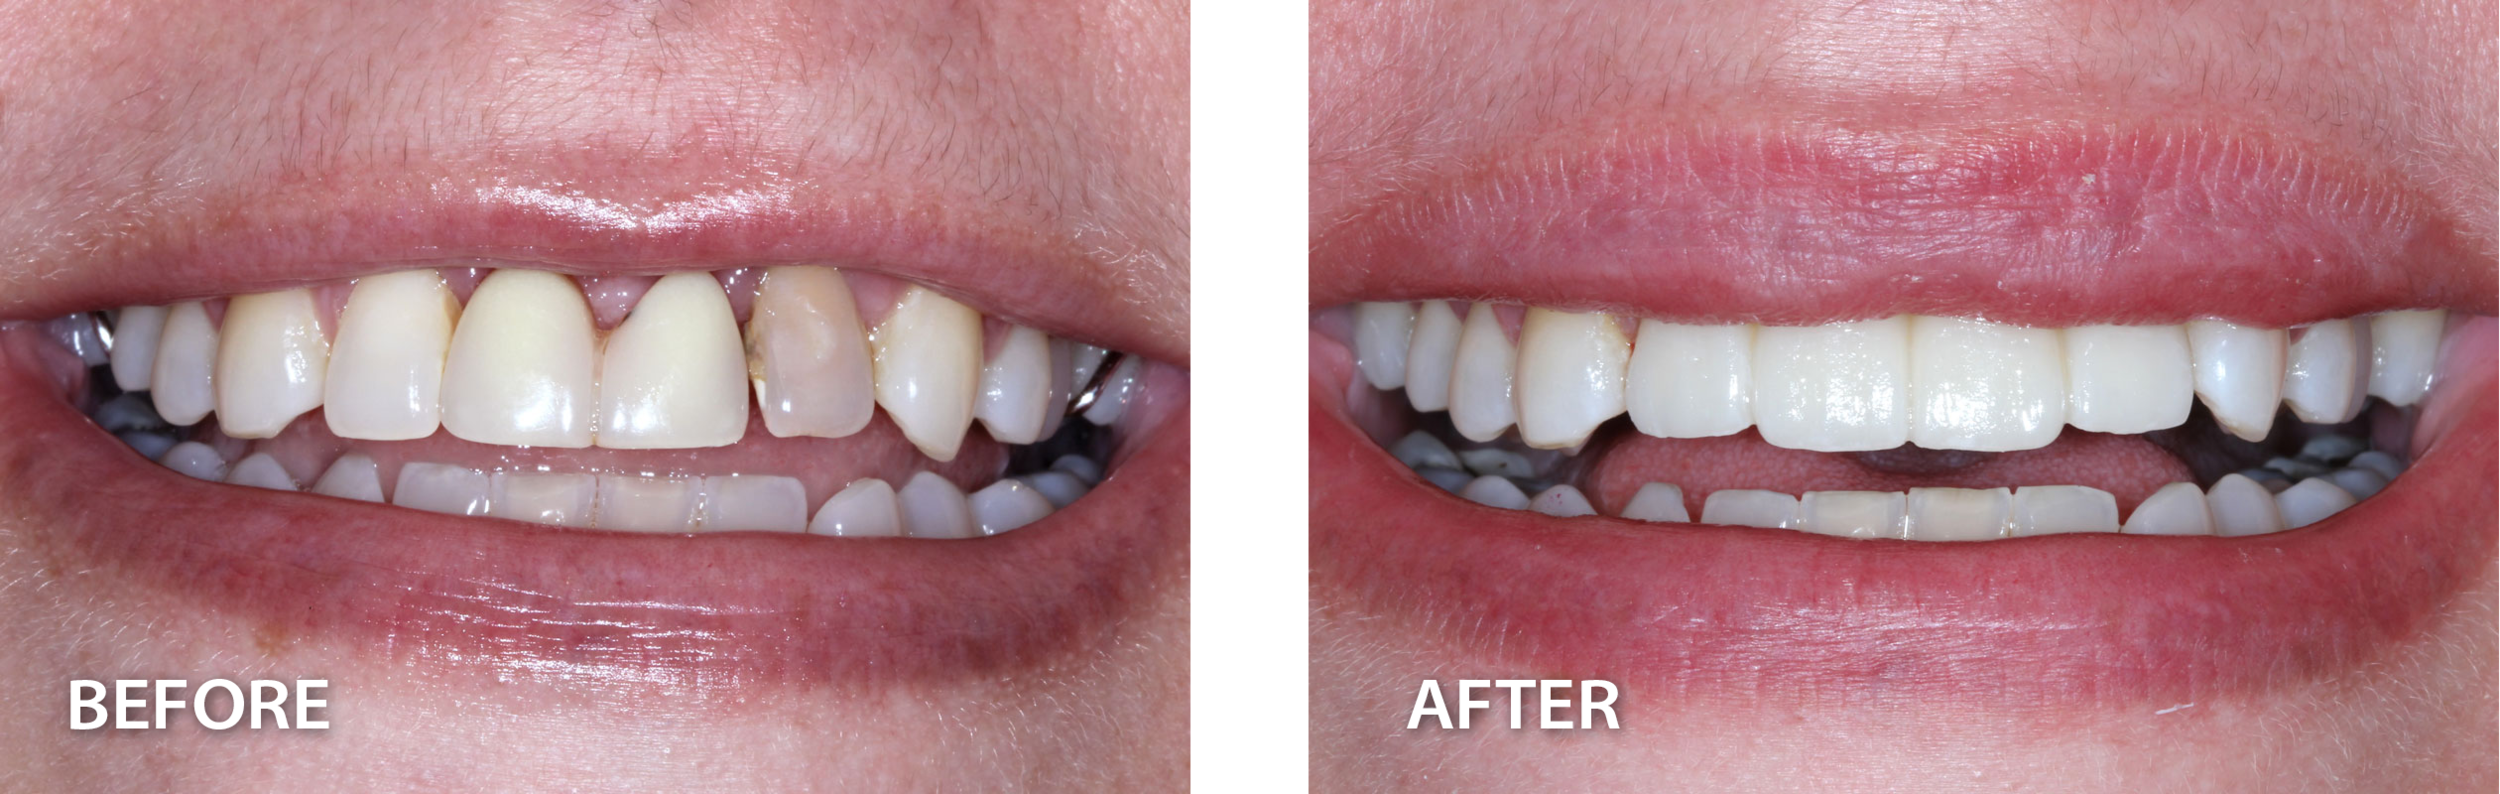  before of smile with darkened, crooked teeth and exposed gums beside after picture of same smile with corrected teeth and gum line from dental procedure 